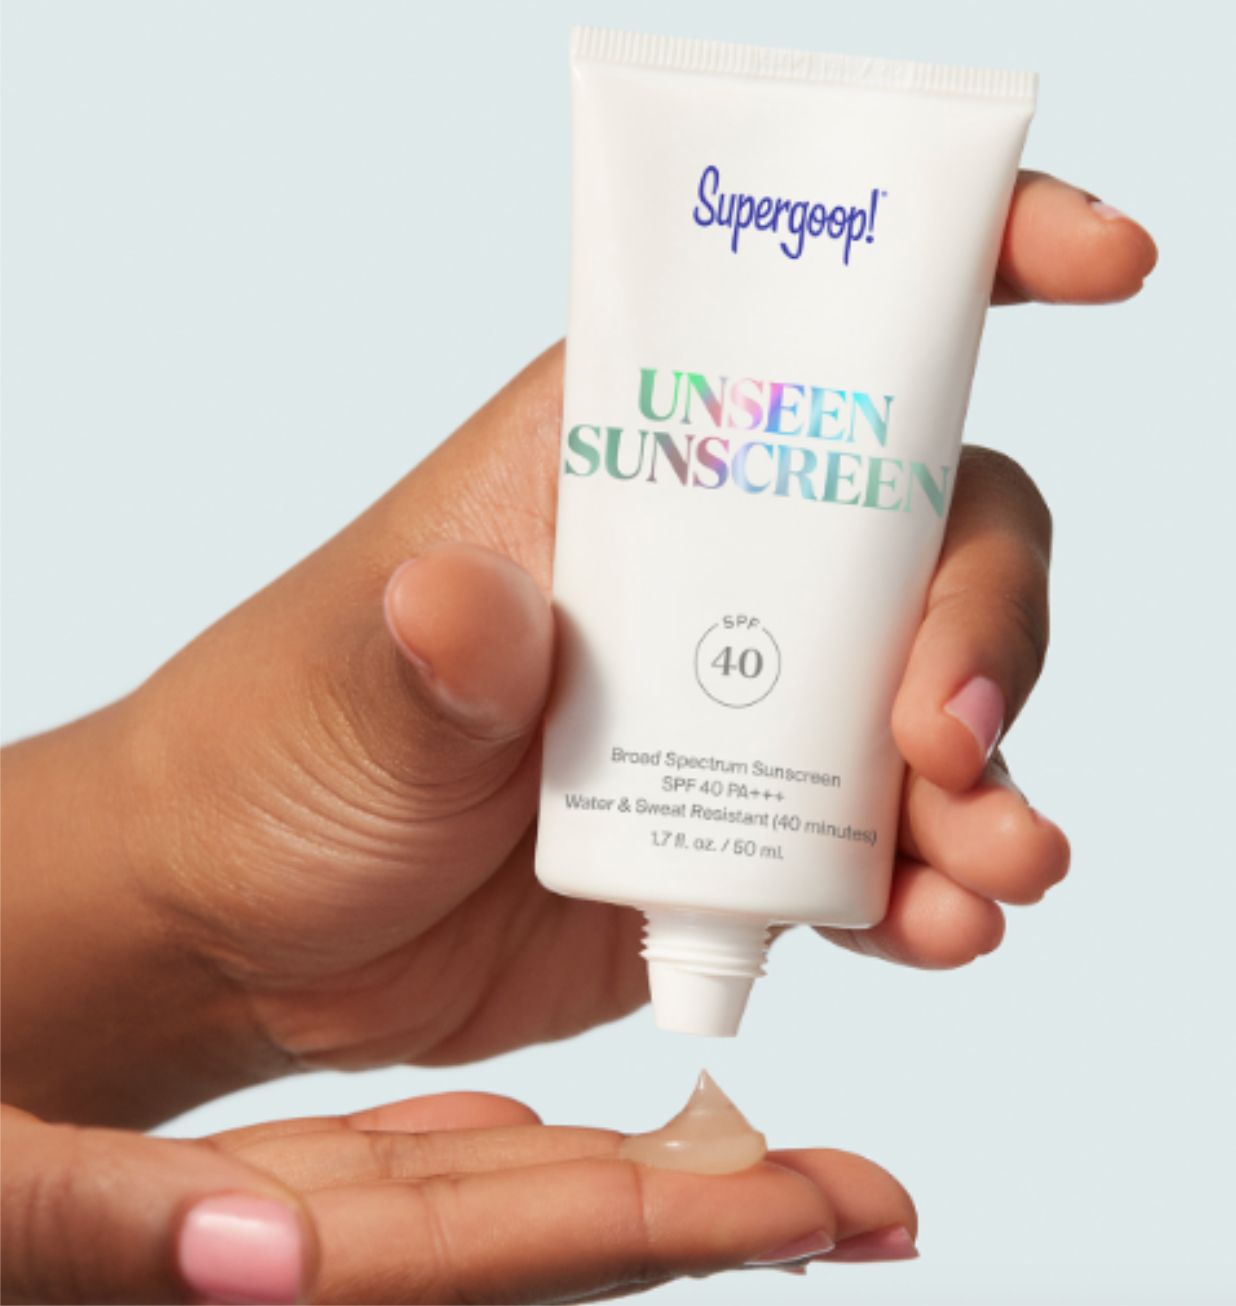 hands squeezing out sunscreen from its tube